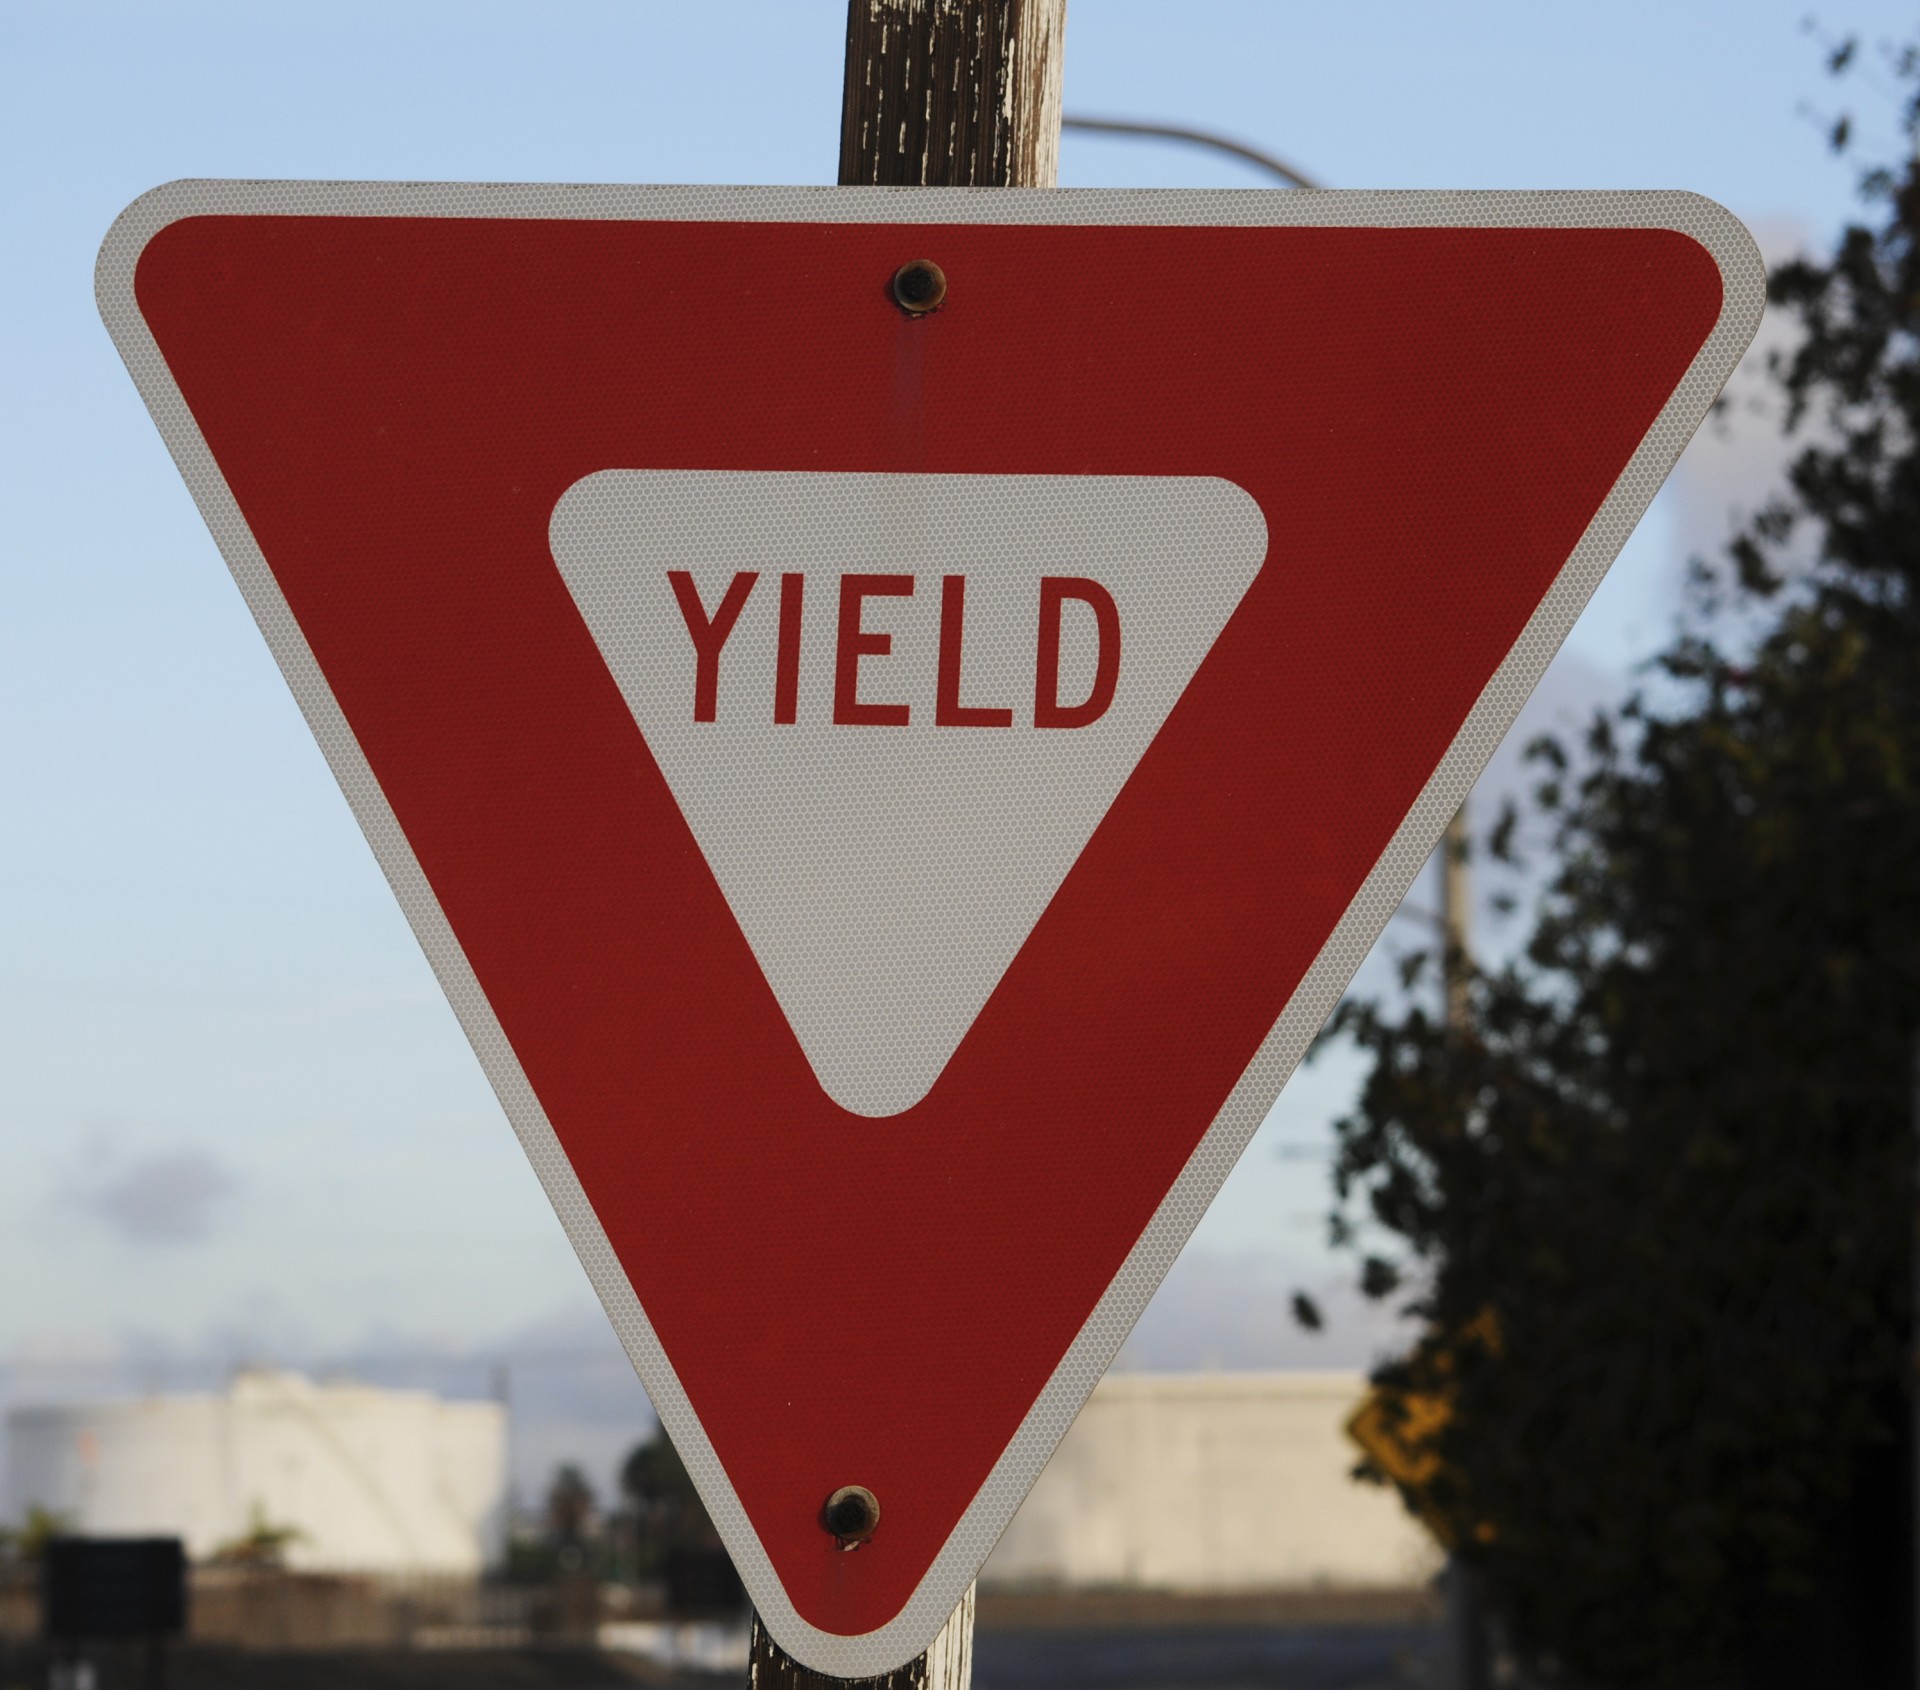 Yield Sign Warning Red Close Up Free Image From Needpix Com